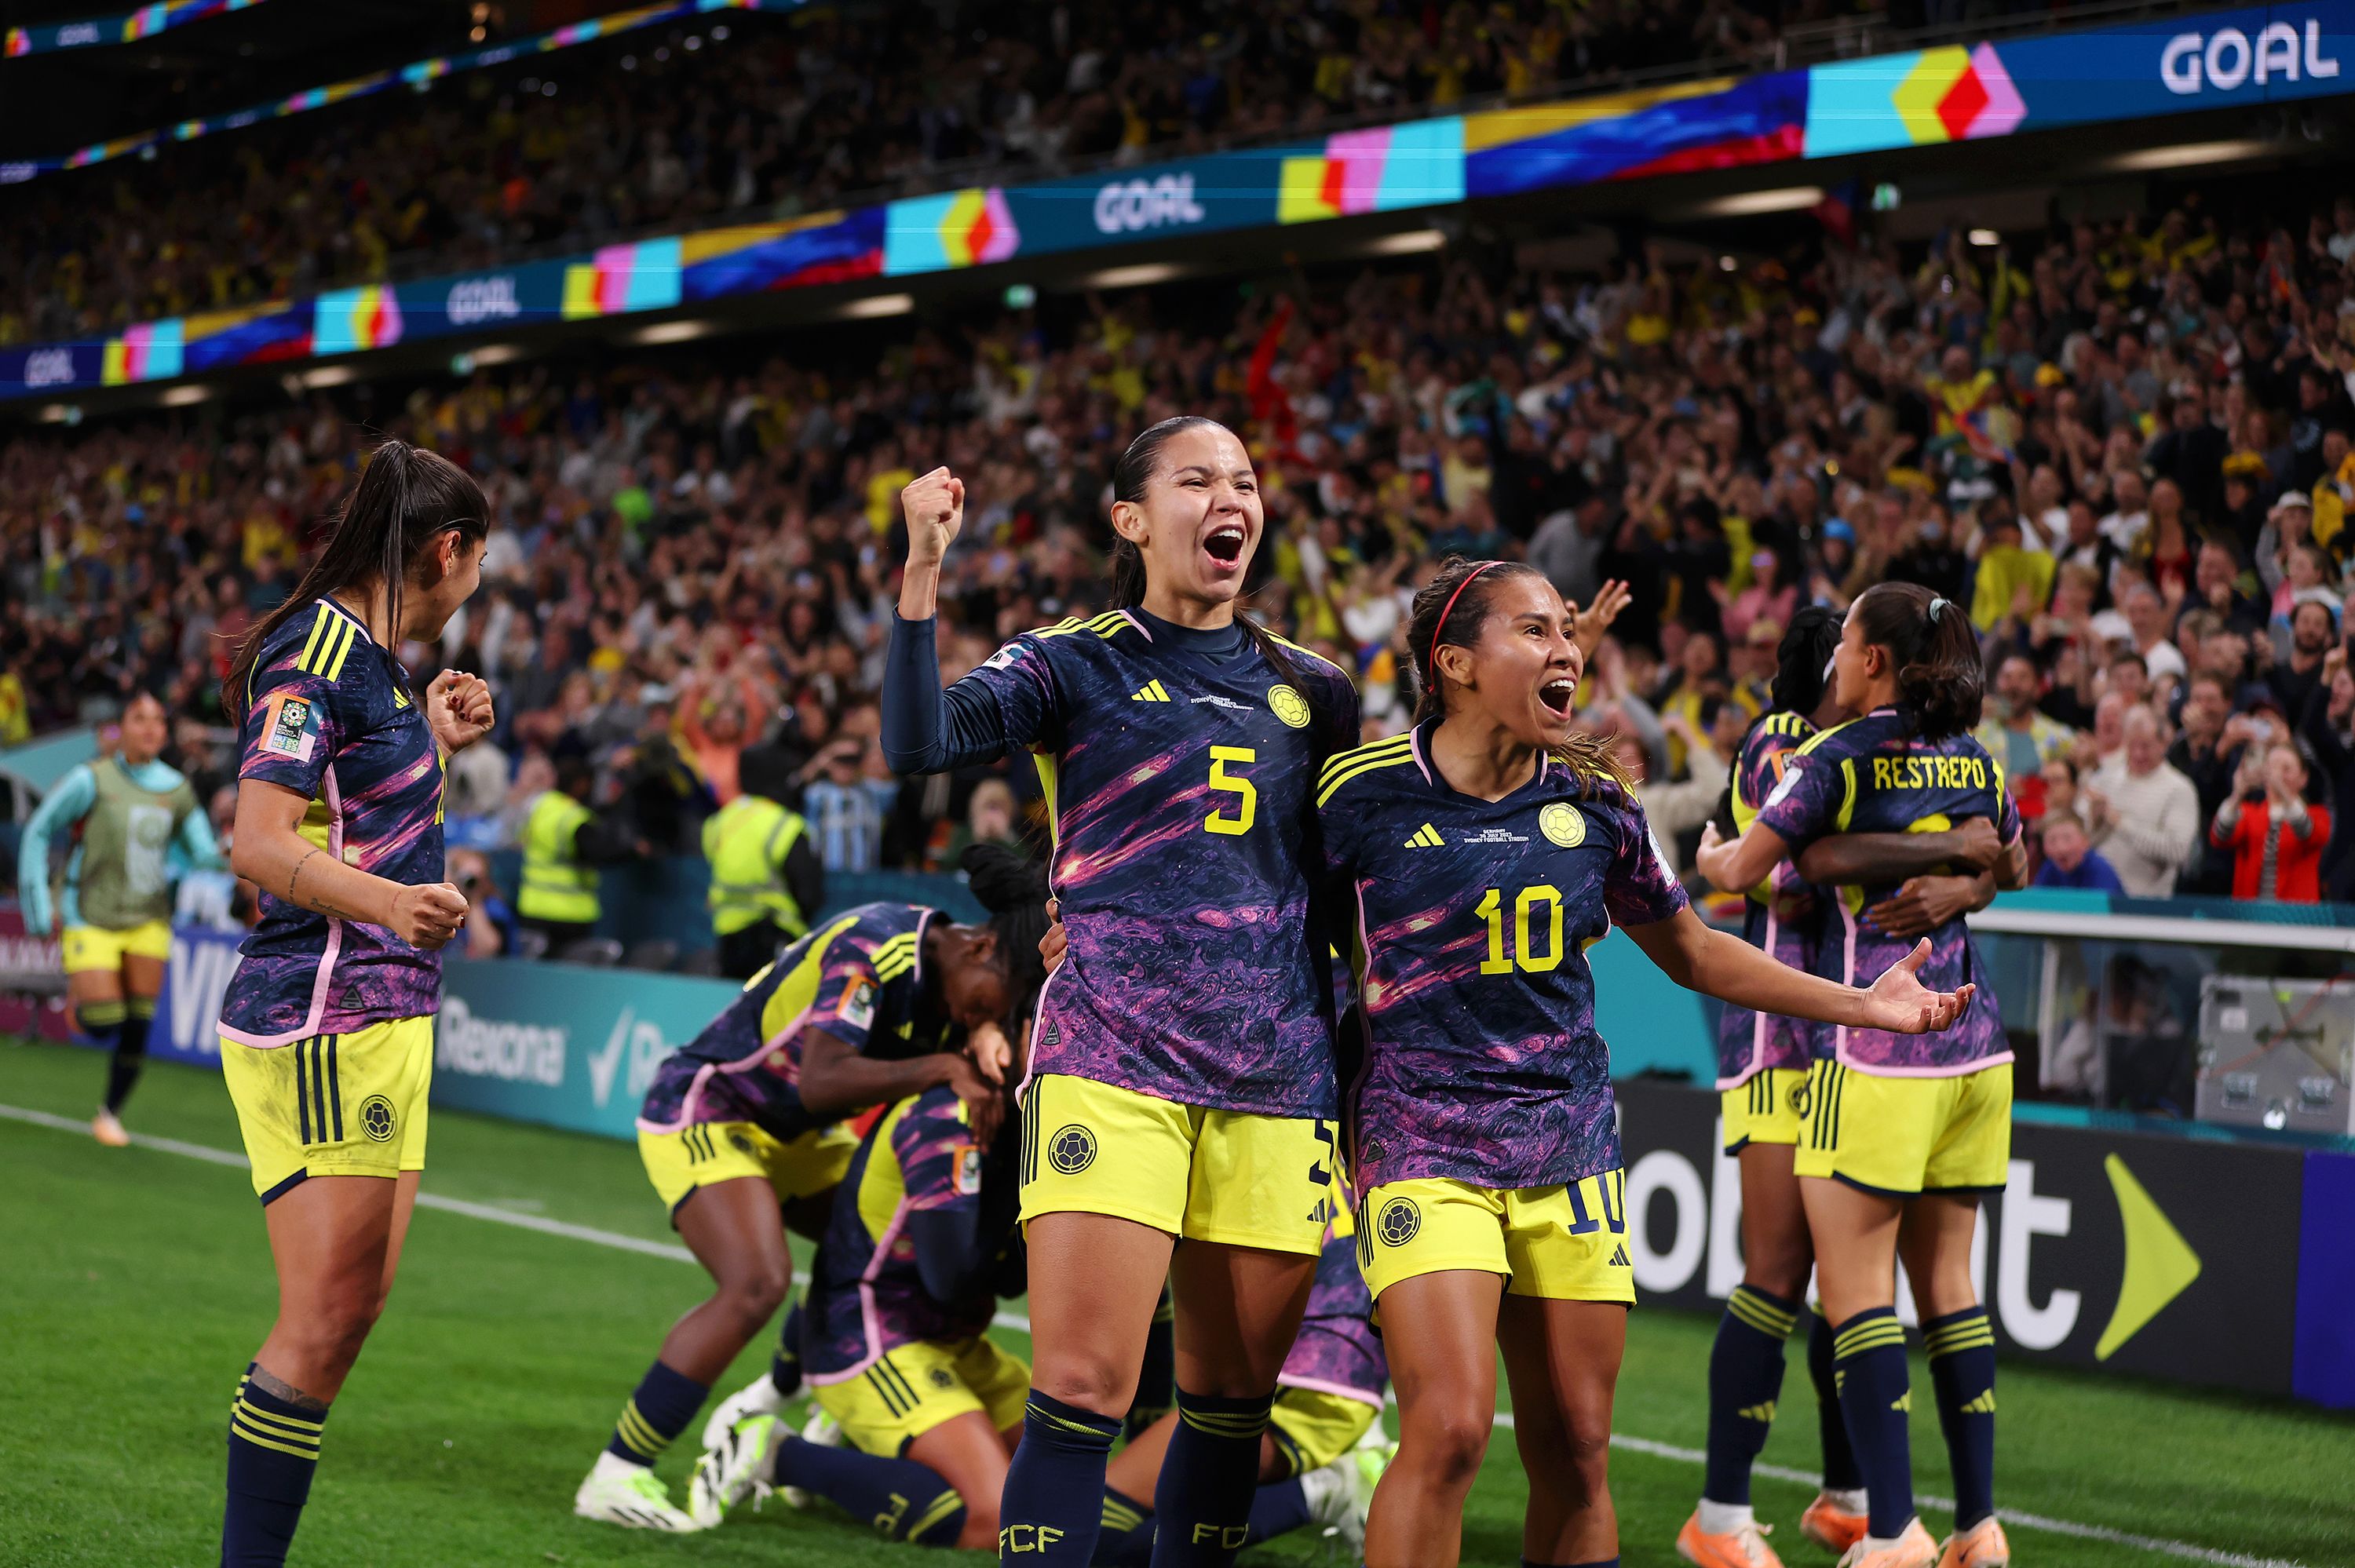 Germany vs. Colombia: How to Watch FIFA Women's World Cup 2023